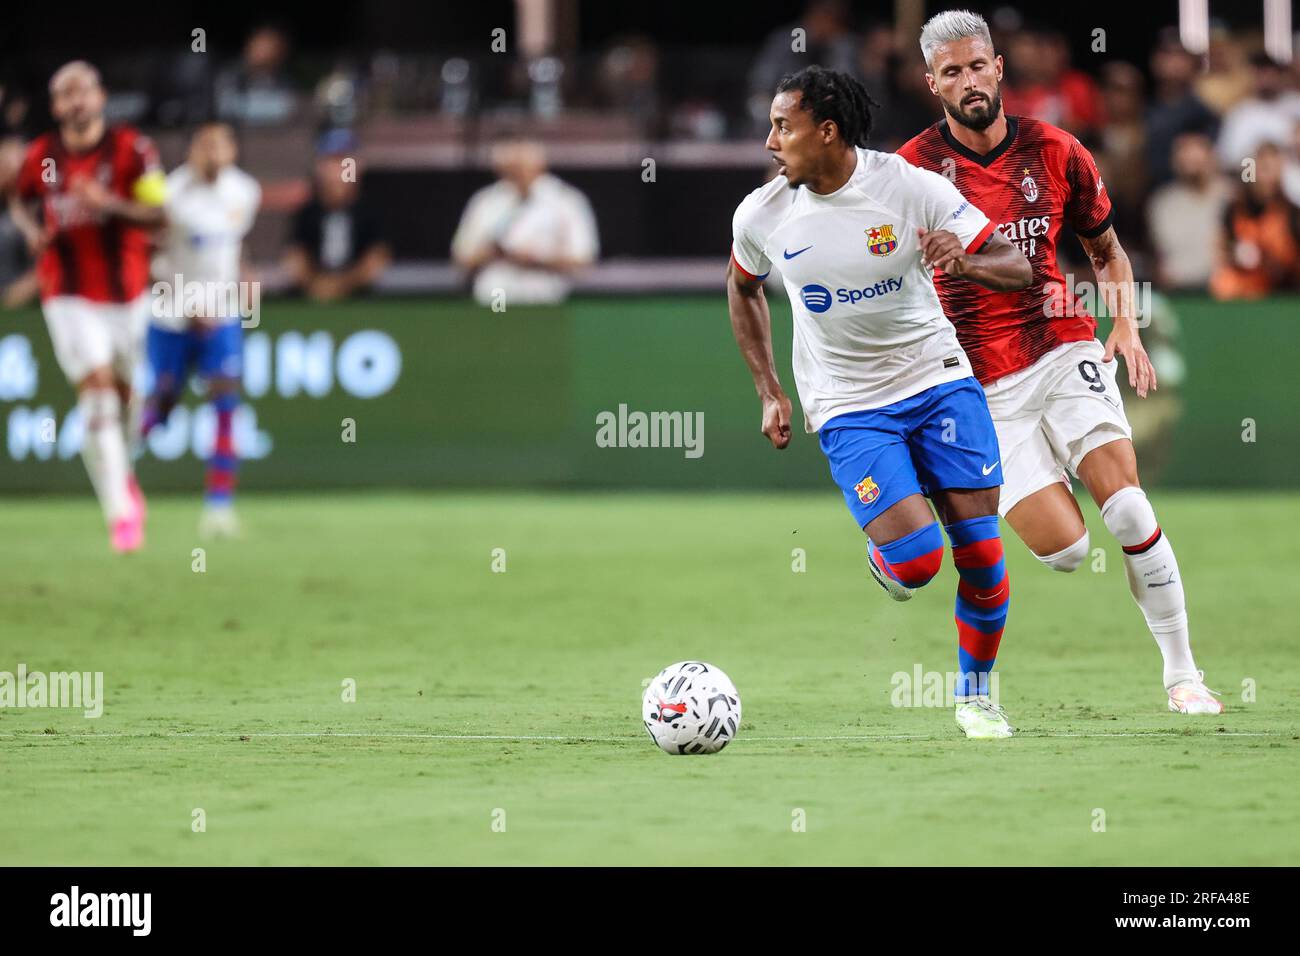 August 1, 2023: Barcelona midfielder Raphinha (22) controls the ball during the first half of the 2023 Soccer Champions Tour featuring FC Barcelona vs AC Milan at Allegiant Stadium on August 1, 2023 in Las Vegas, NV. Christopher Trim/CSM. Stock Photo